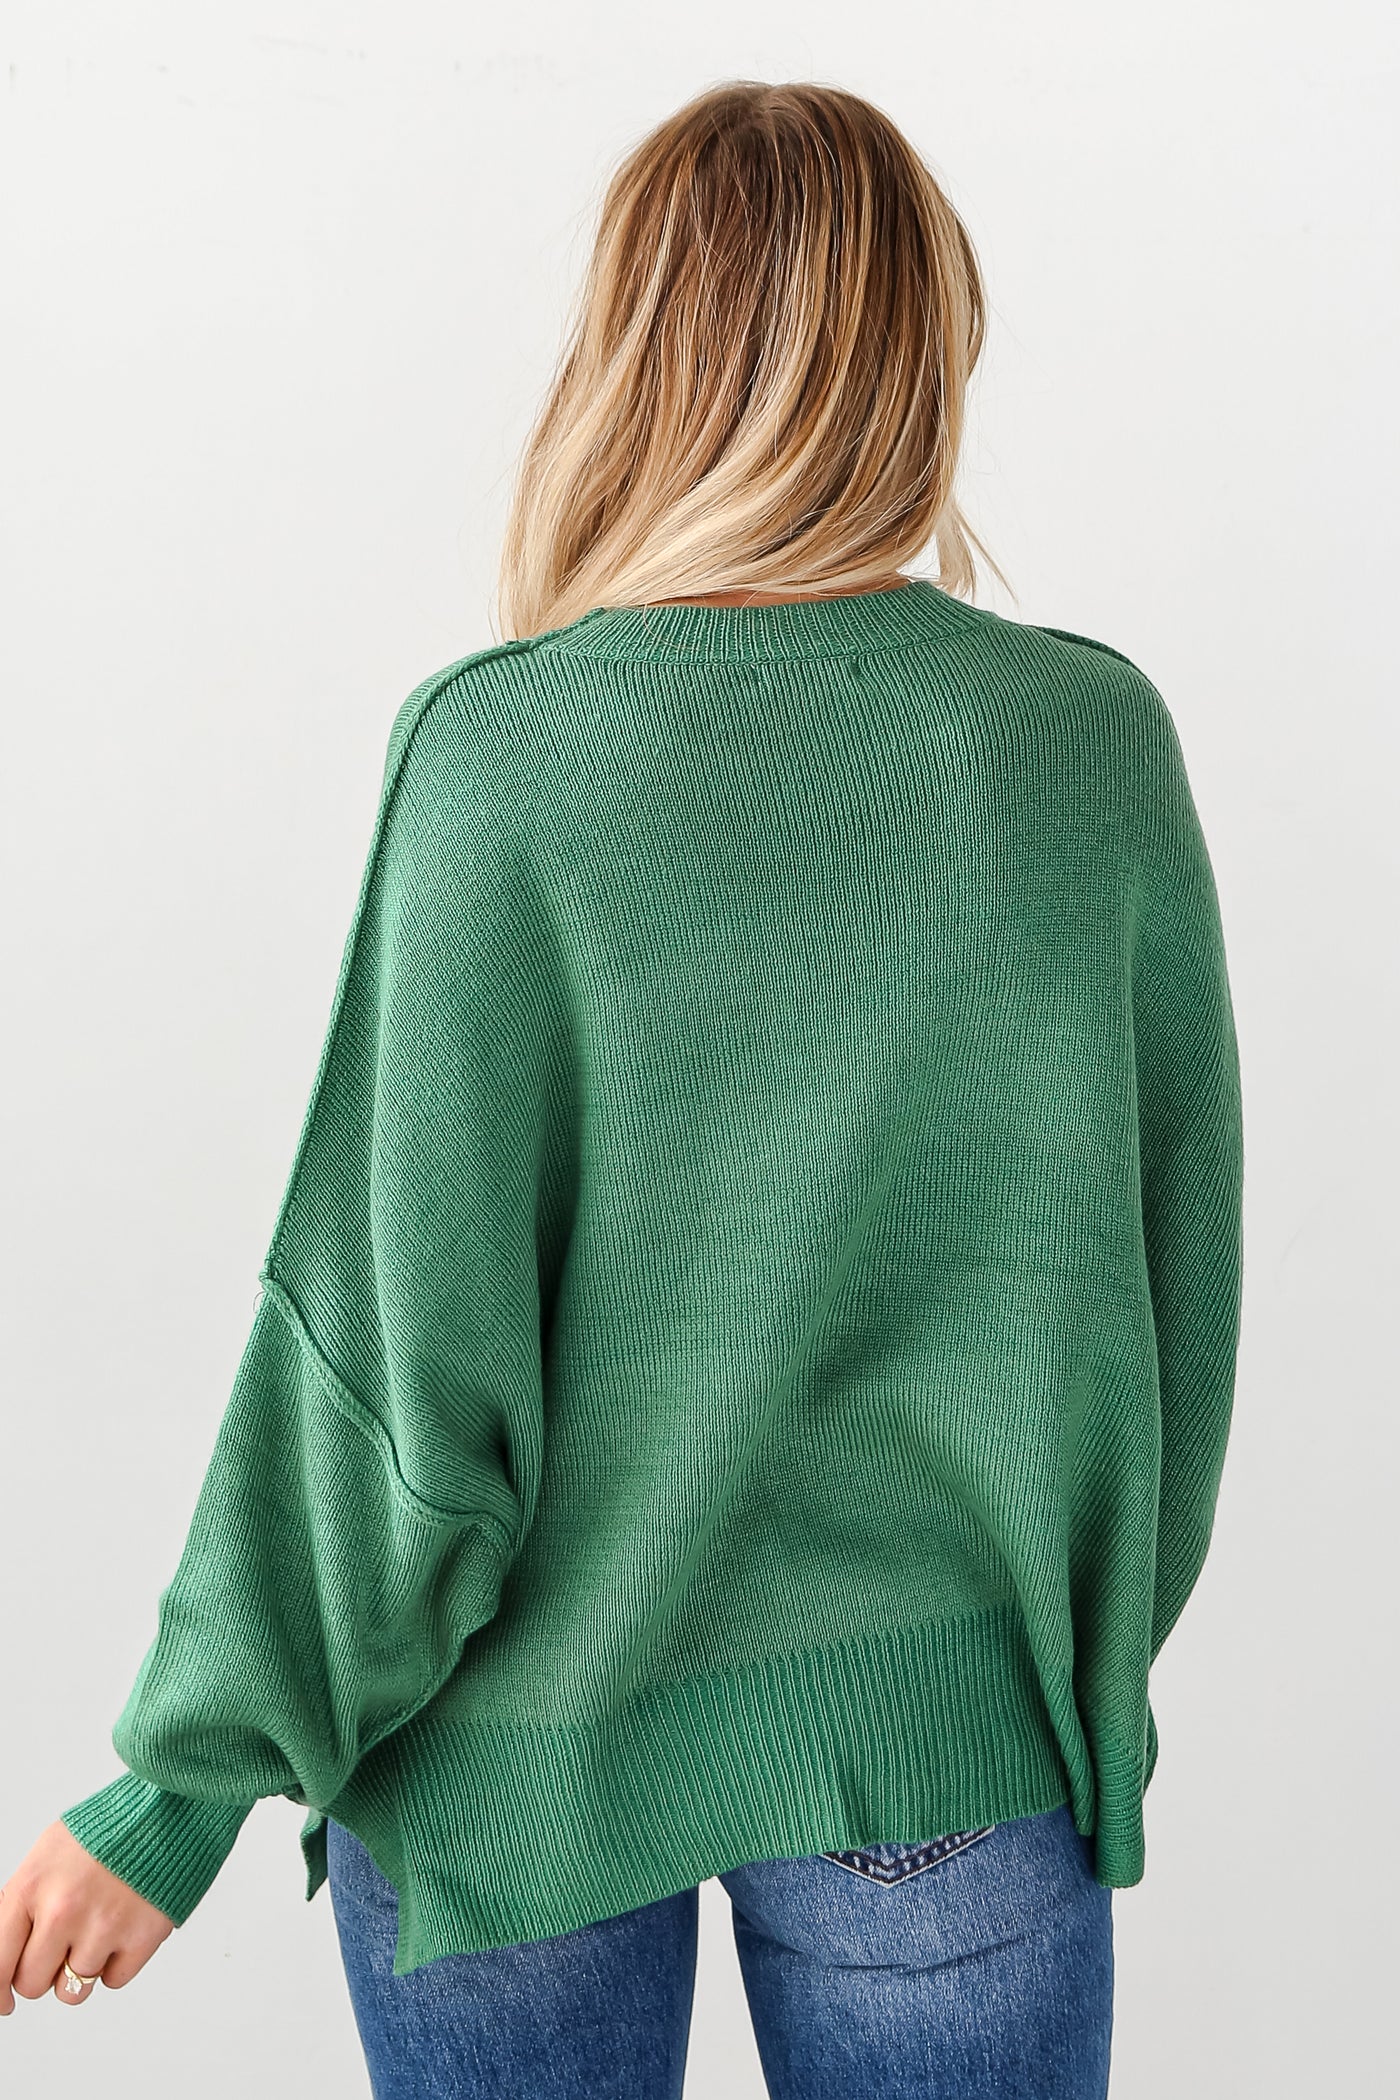 green Oversized Sweater back view